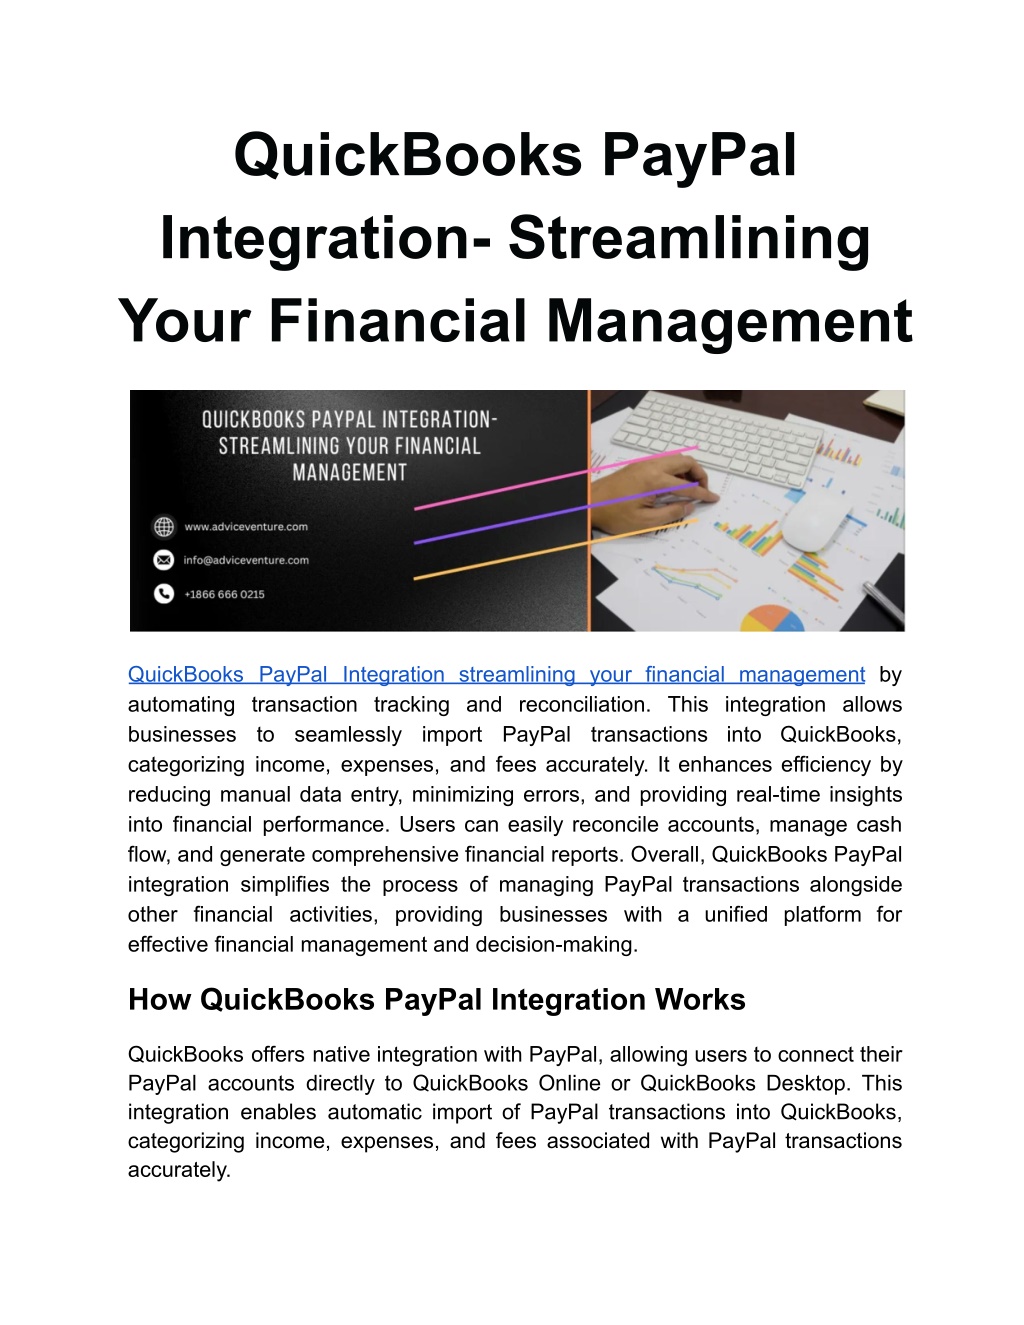 quickbooks paypal integration streamlining your l.w